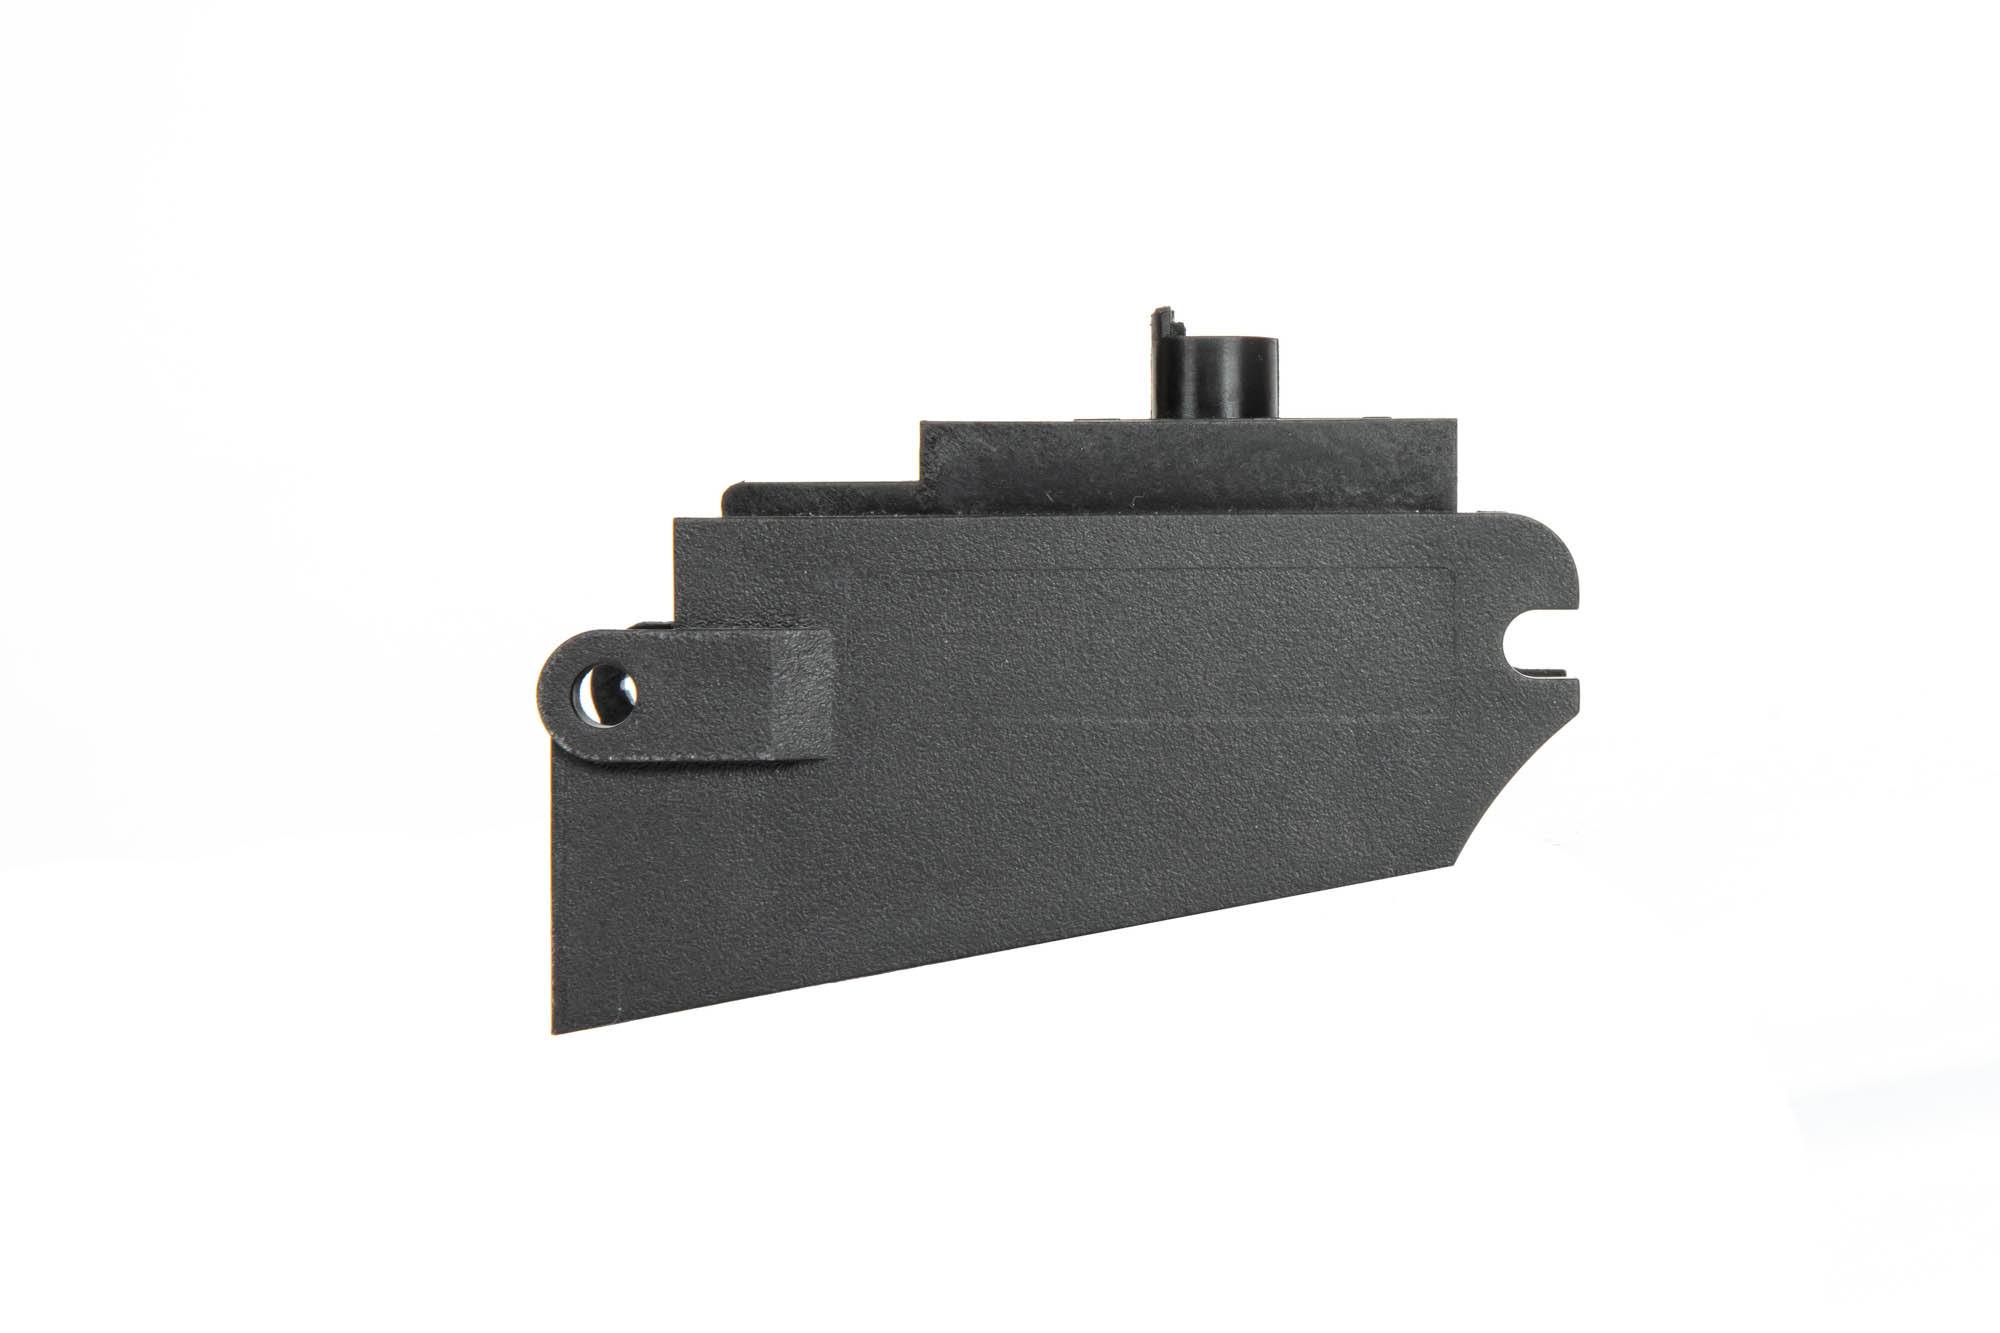 AR15 Magazine Adapter for Specna Arms G-Series replicas by Specna Arms on Airsoft Mania Europe